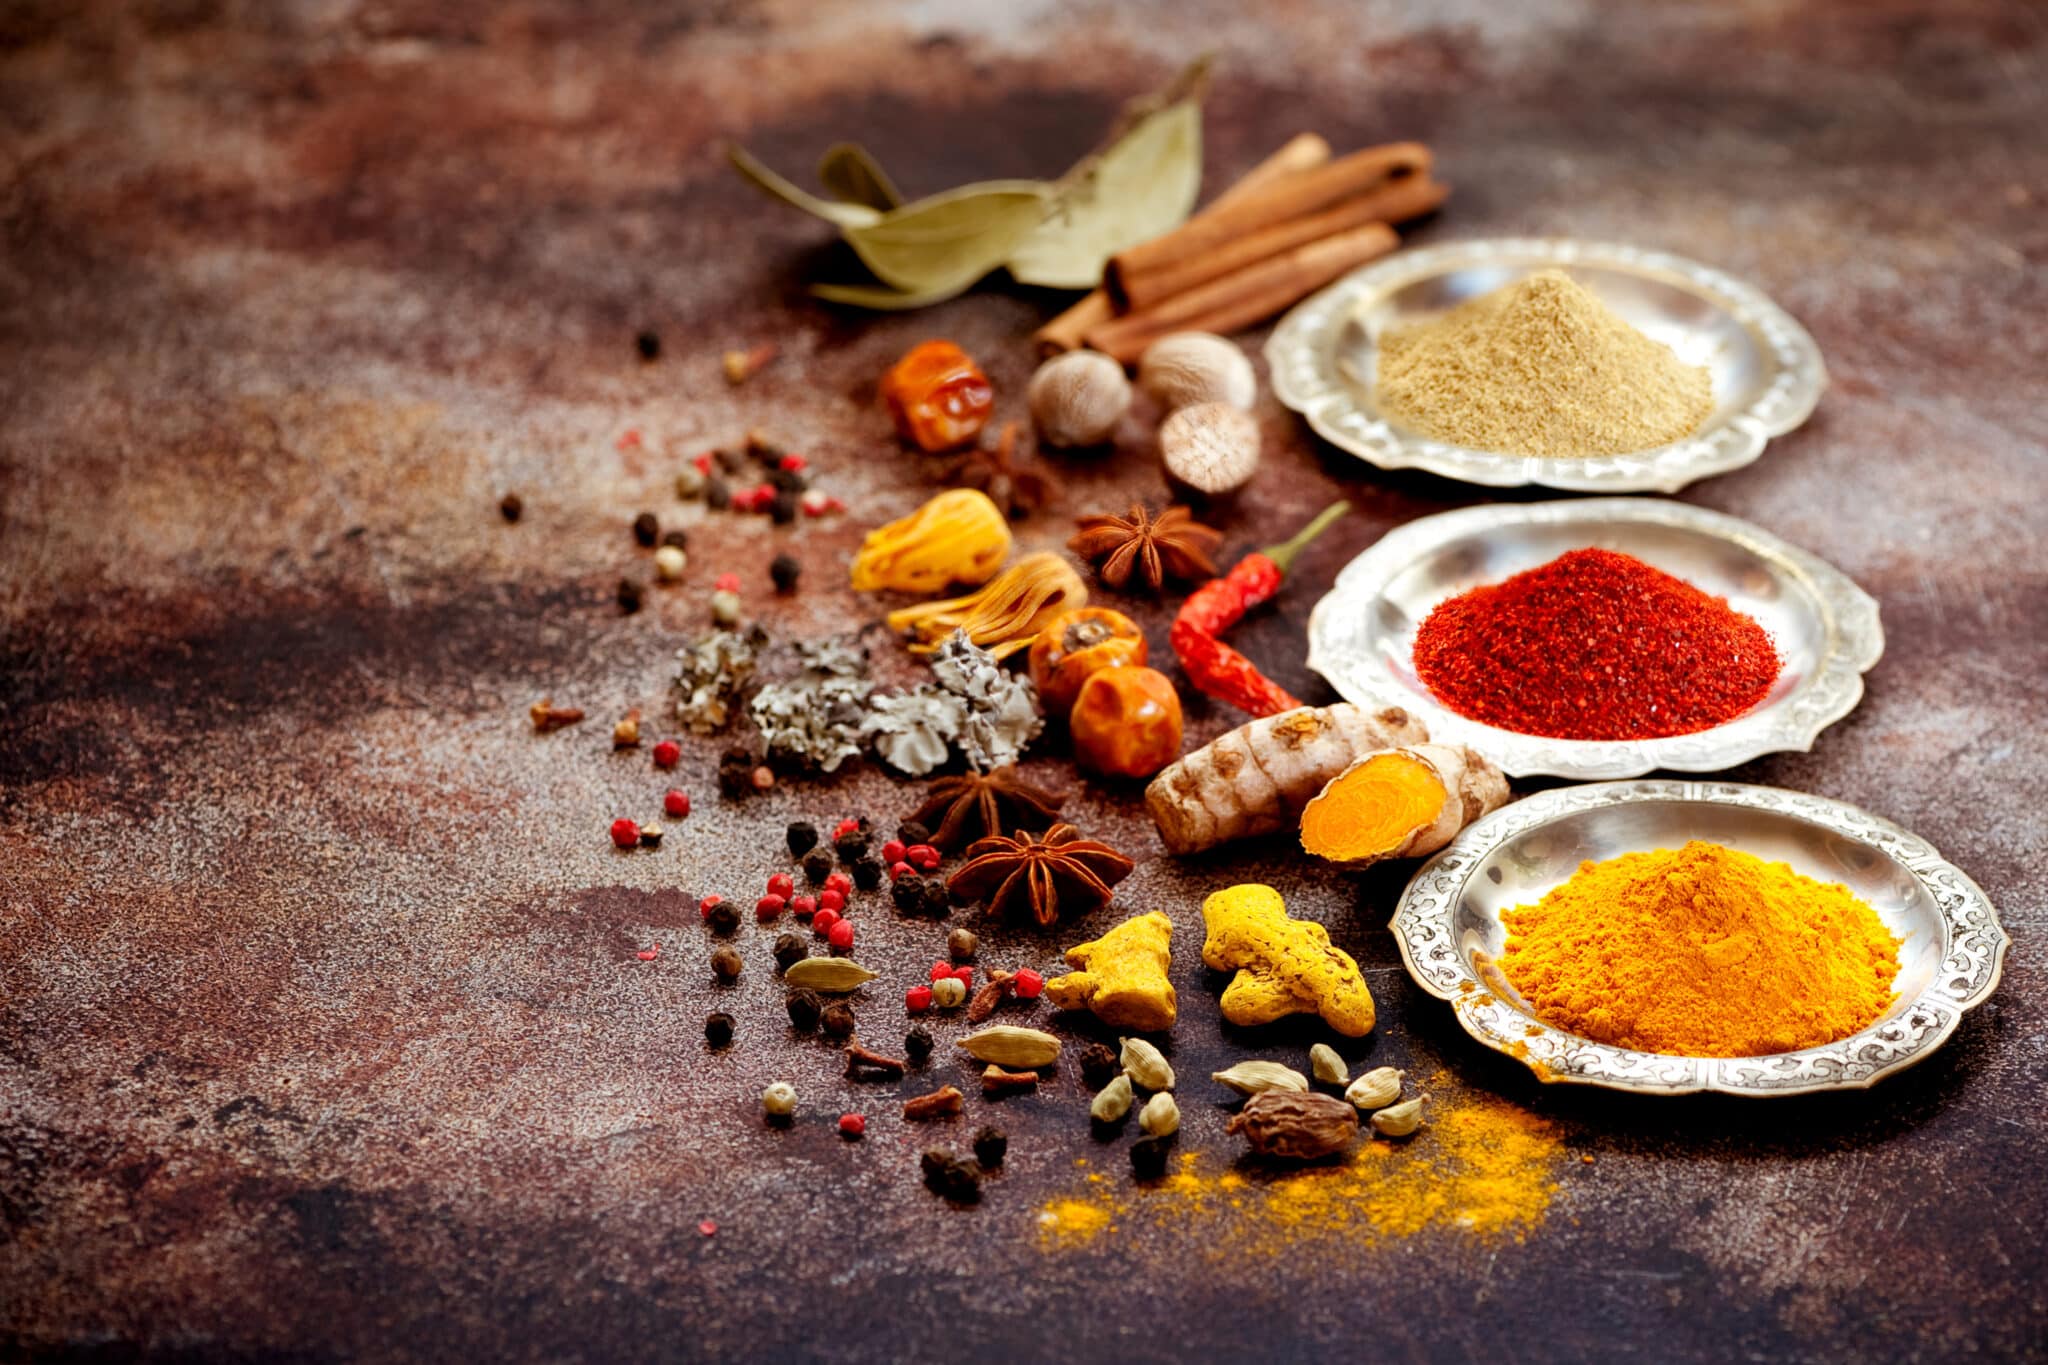 Garam Masala – the magical blend of spices from India